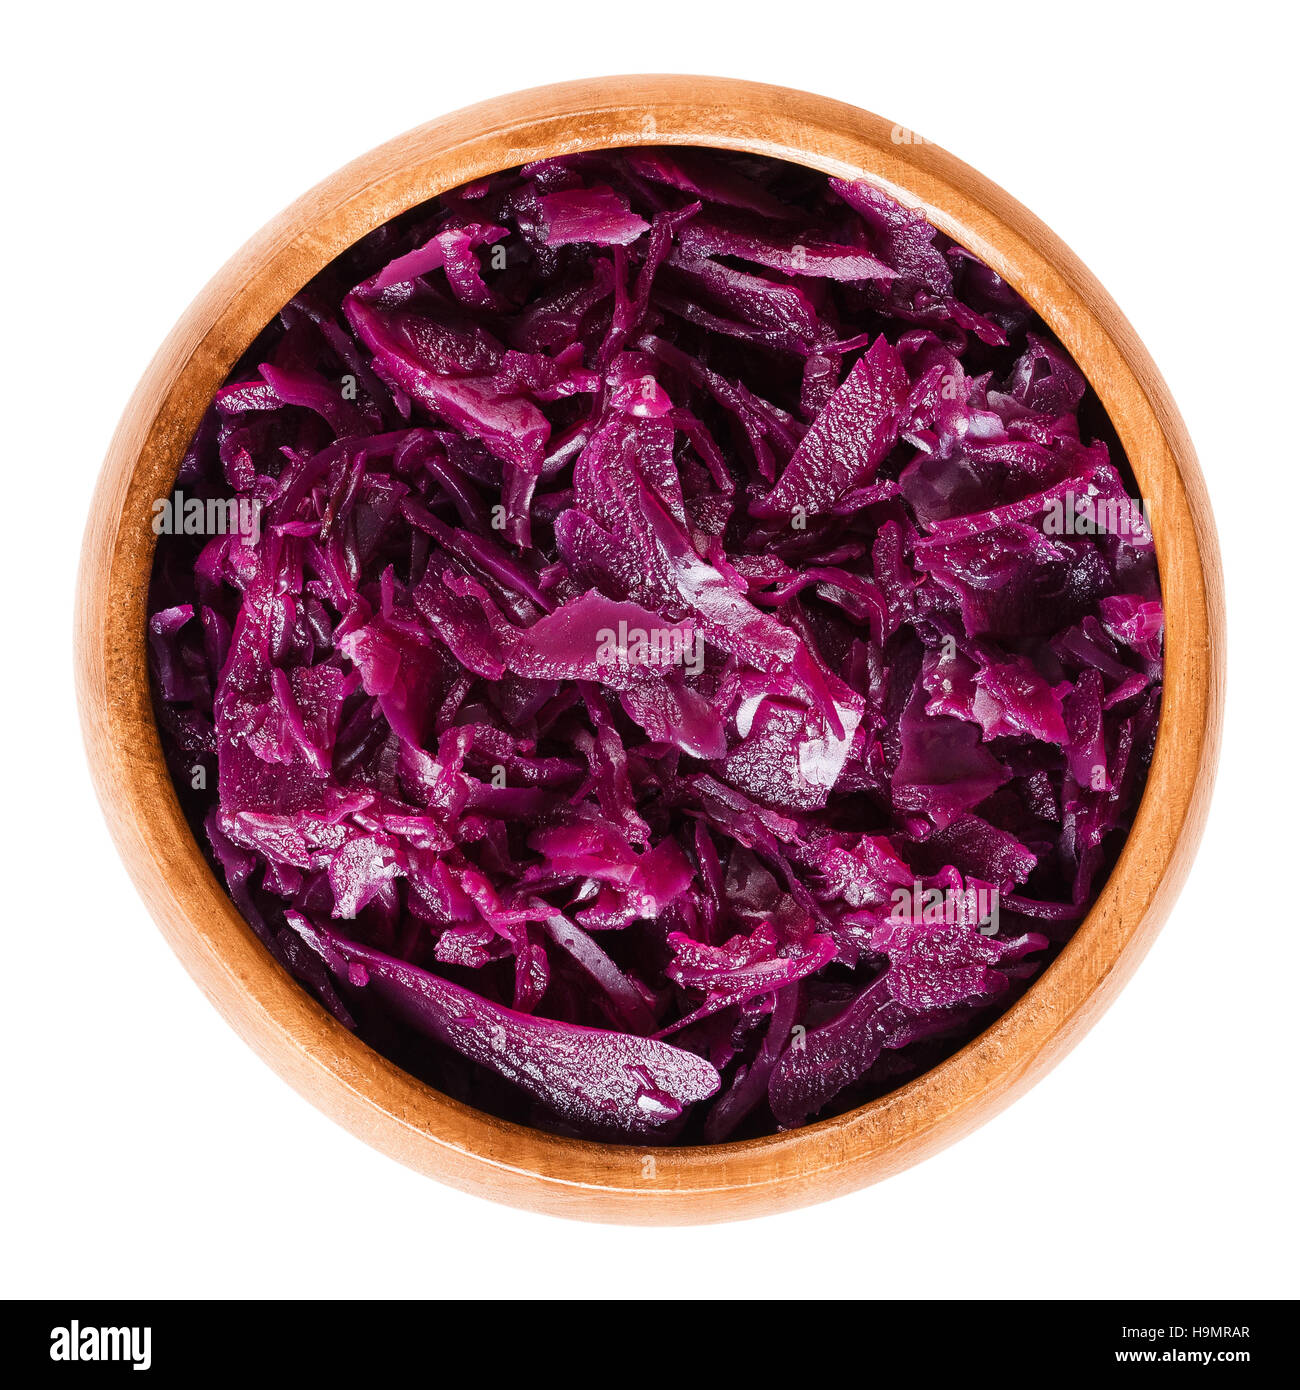 Cooked red cabbage in wooden bowl. Brassica oleracea, also purple cabbage, red or blue kraut. Stock Photo